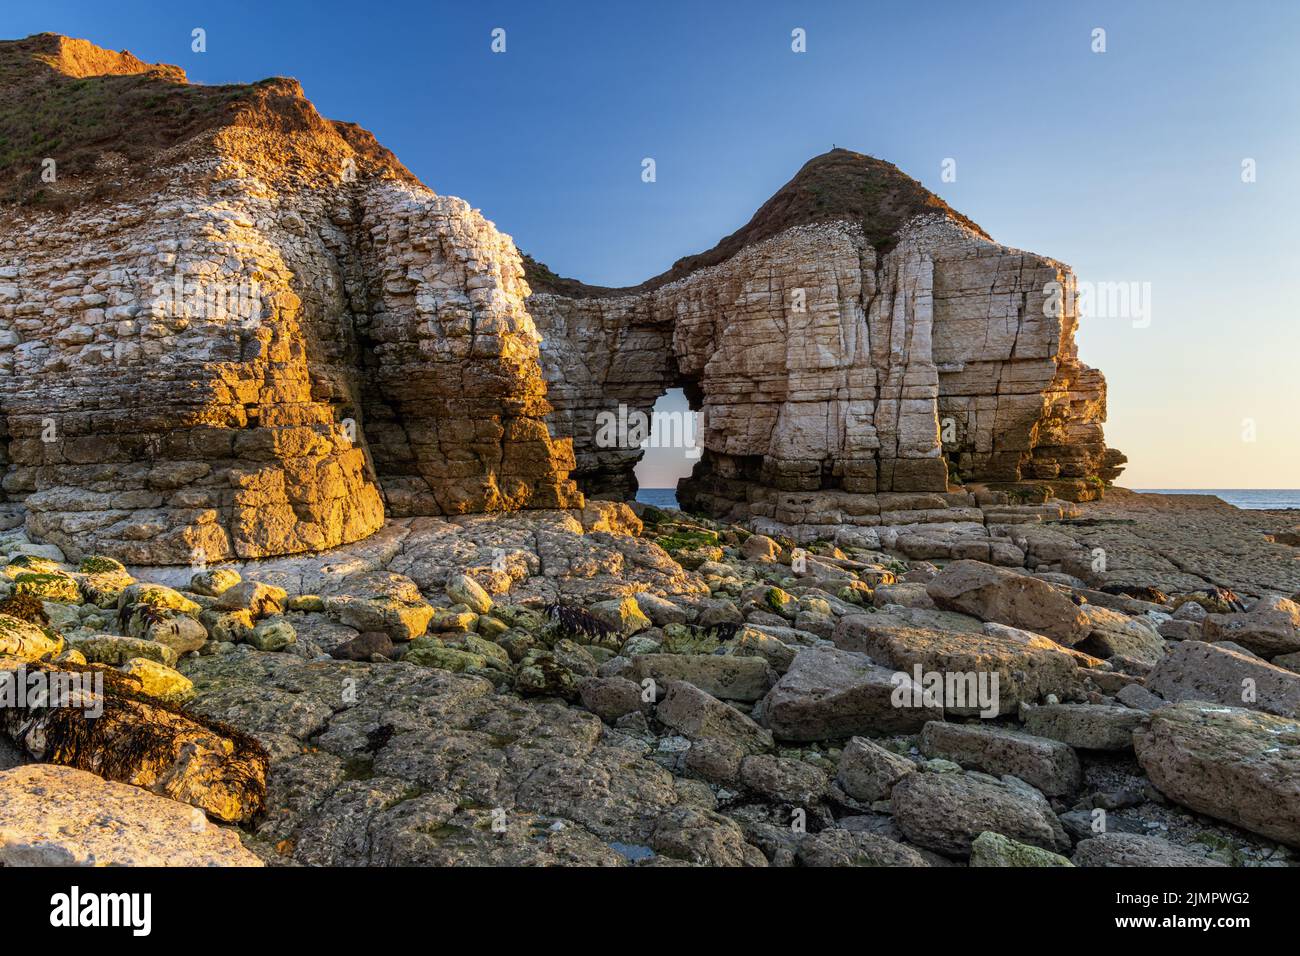 Thornwick Nab is an impressive sea stack and arch at Thornwick Bay on the East Yorkshire coast, England, Uk. Taken at sunrise. Stock Photo